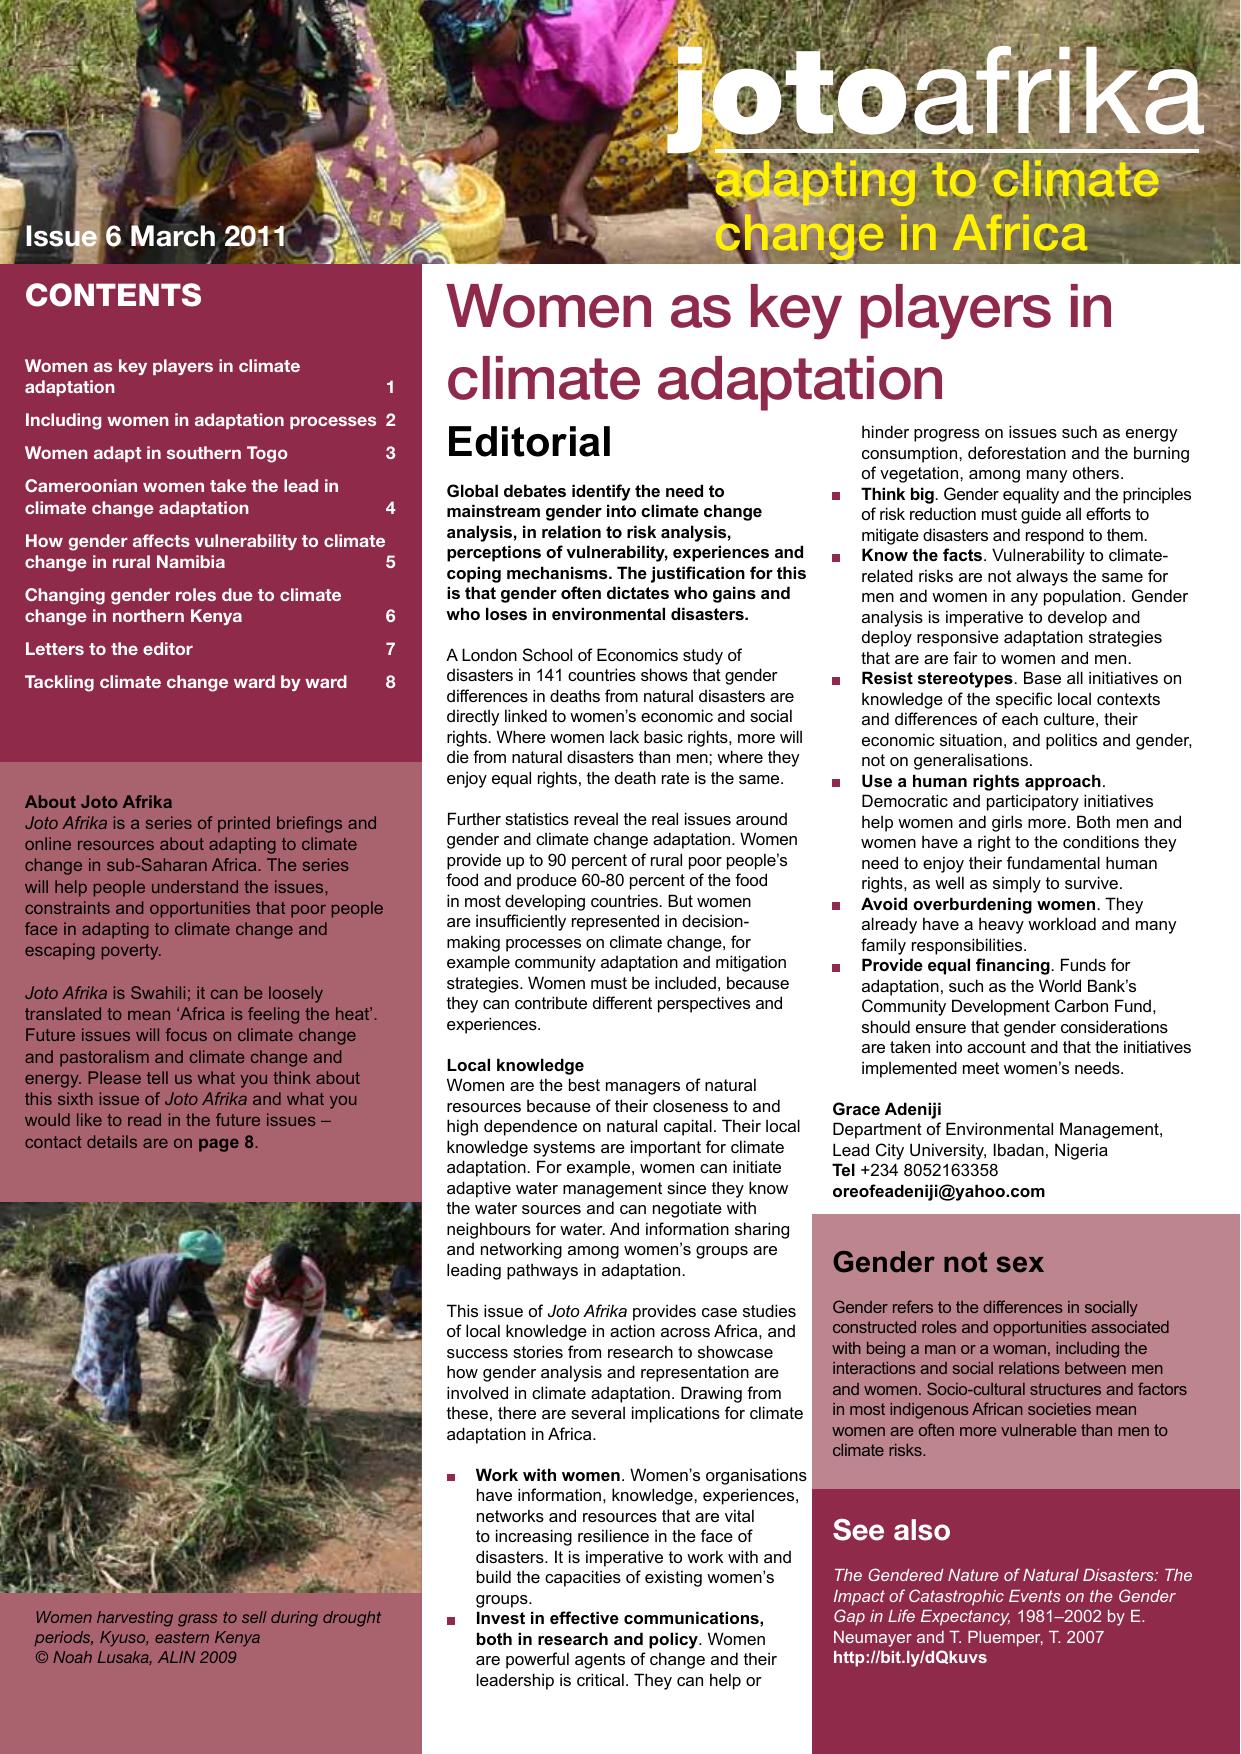 Women as key players in climate adaptation, 2011